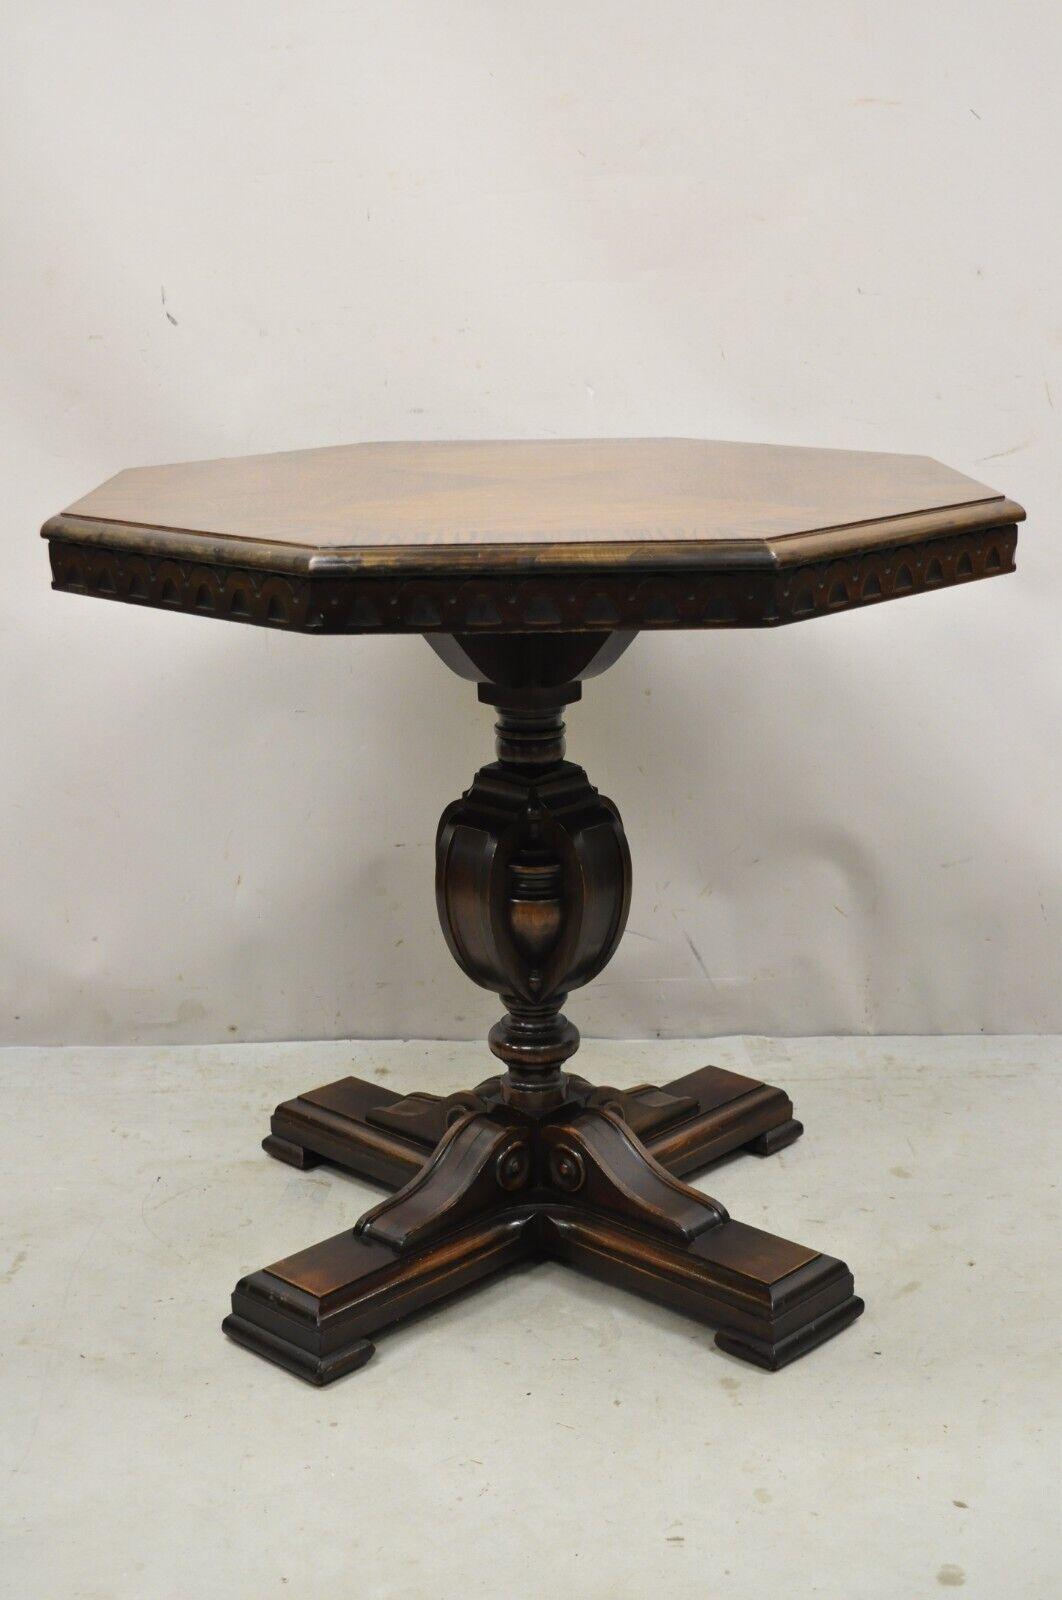 Antique Jacobean Walnut Banded Inlay Sunburst Top Octagonal Center Table. Item features carved pedestal bases, banded inlay sunburst top, zebra wood border, beautiful wood grain, nicely carved details, very nice antique item, great style and form.